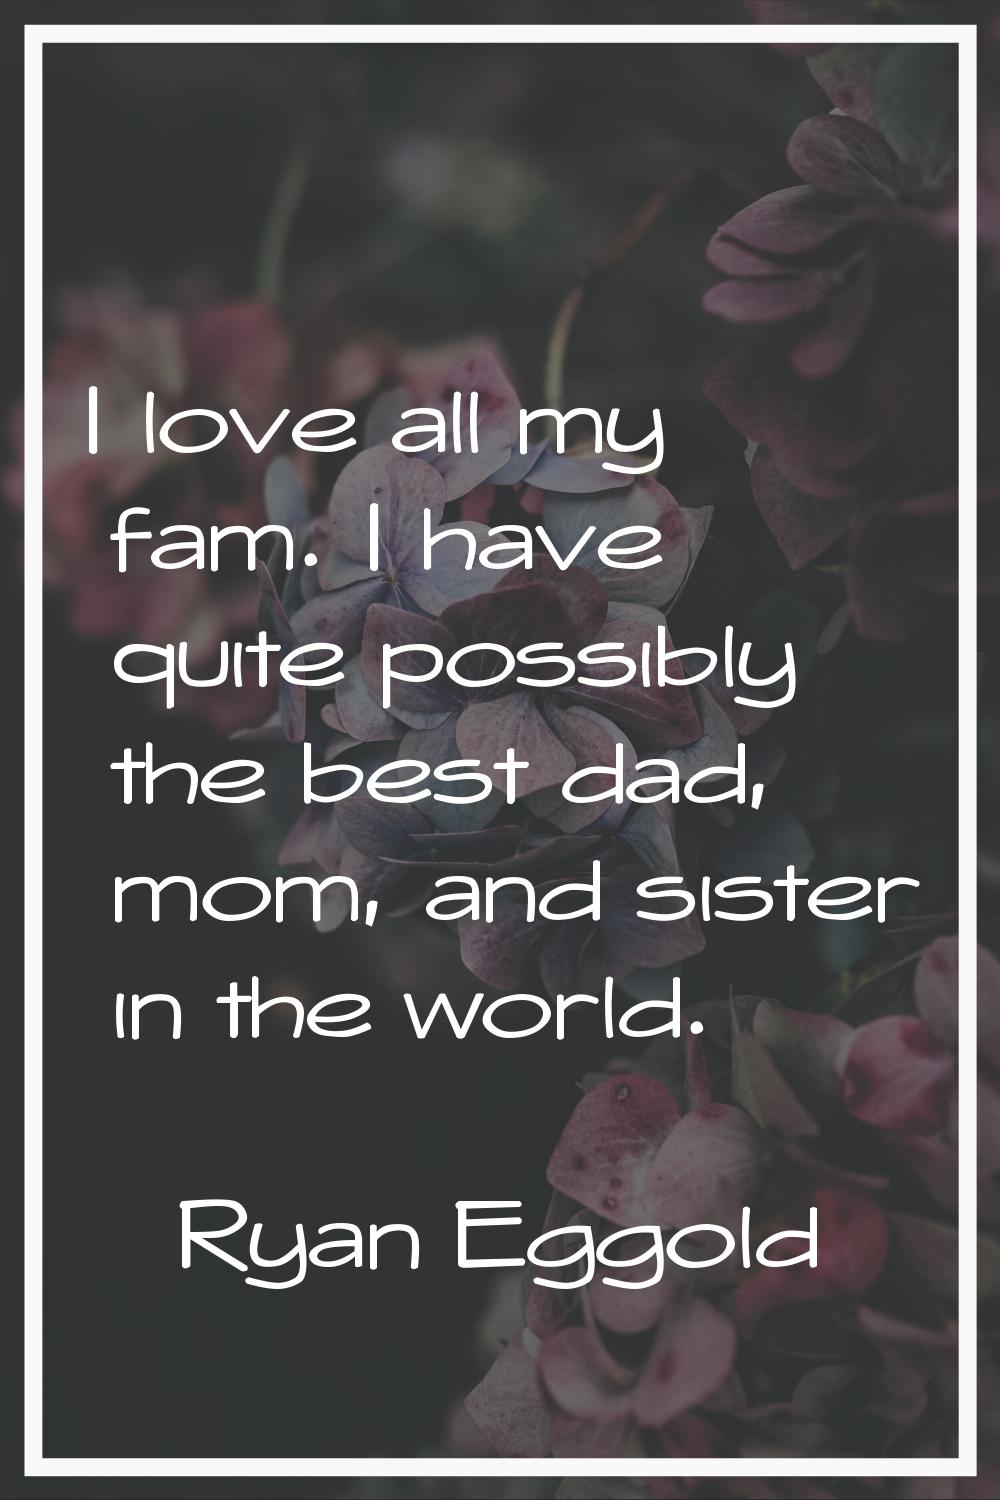 I love all my fam. I have quite possibly the best dad, mom, and sister in the world.